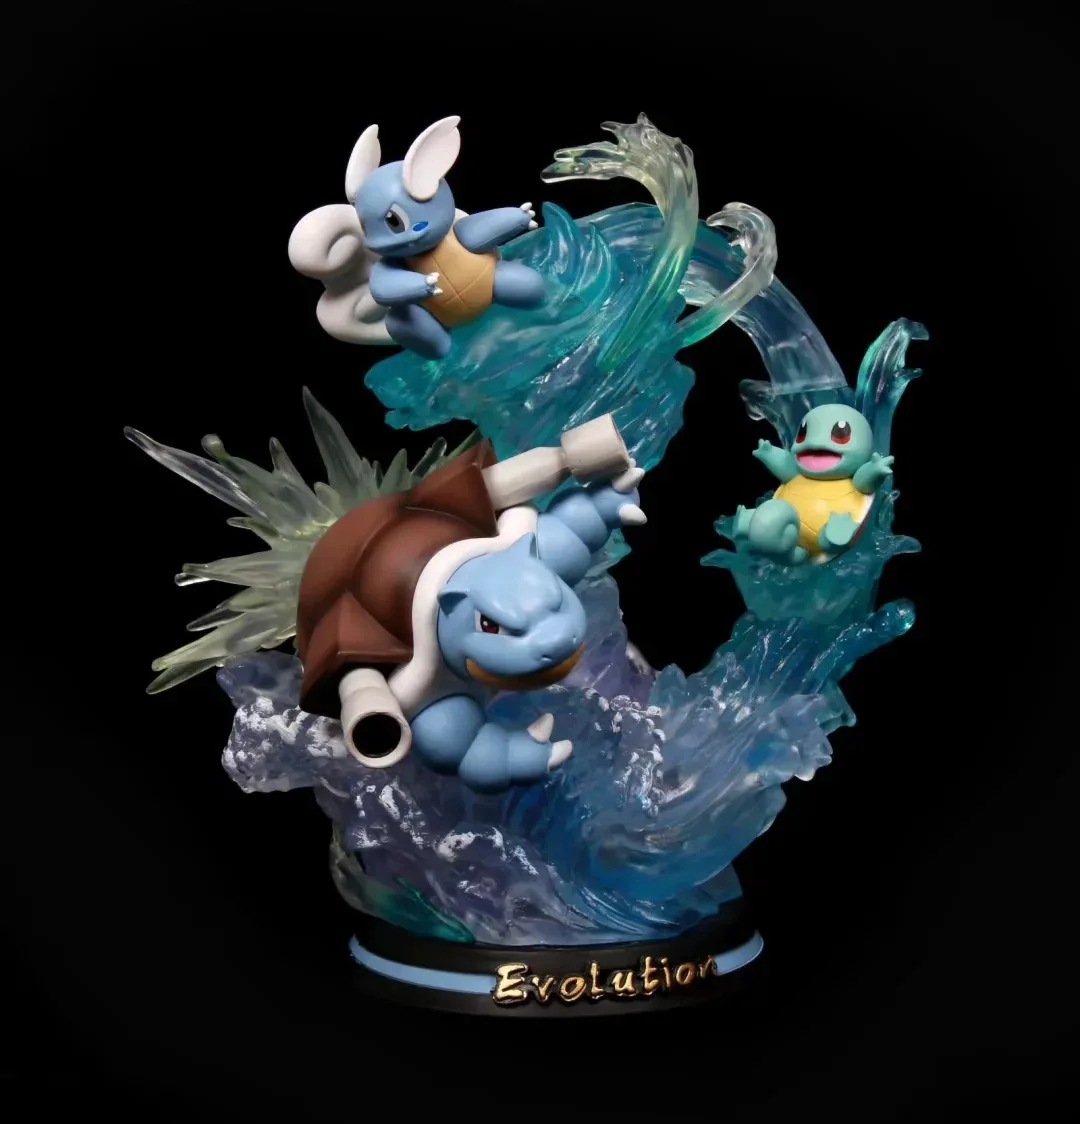 anime-pokemon-blastoise-squirtle-evolution-ver-gk-pvc-action-figure-statue-collectible-model-kids-light-up-toys-doll-gifts-26cm